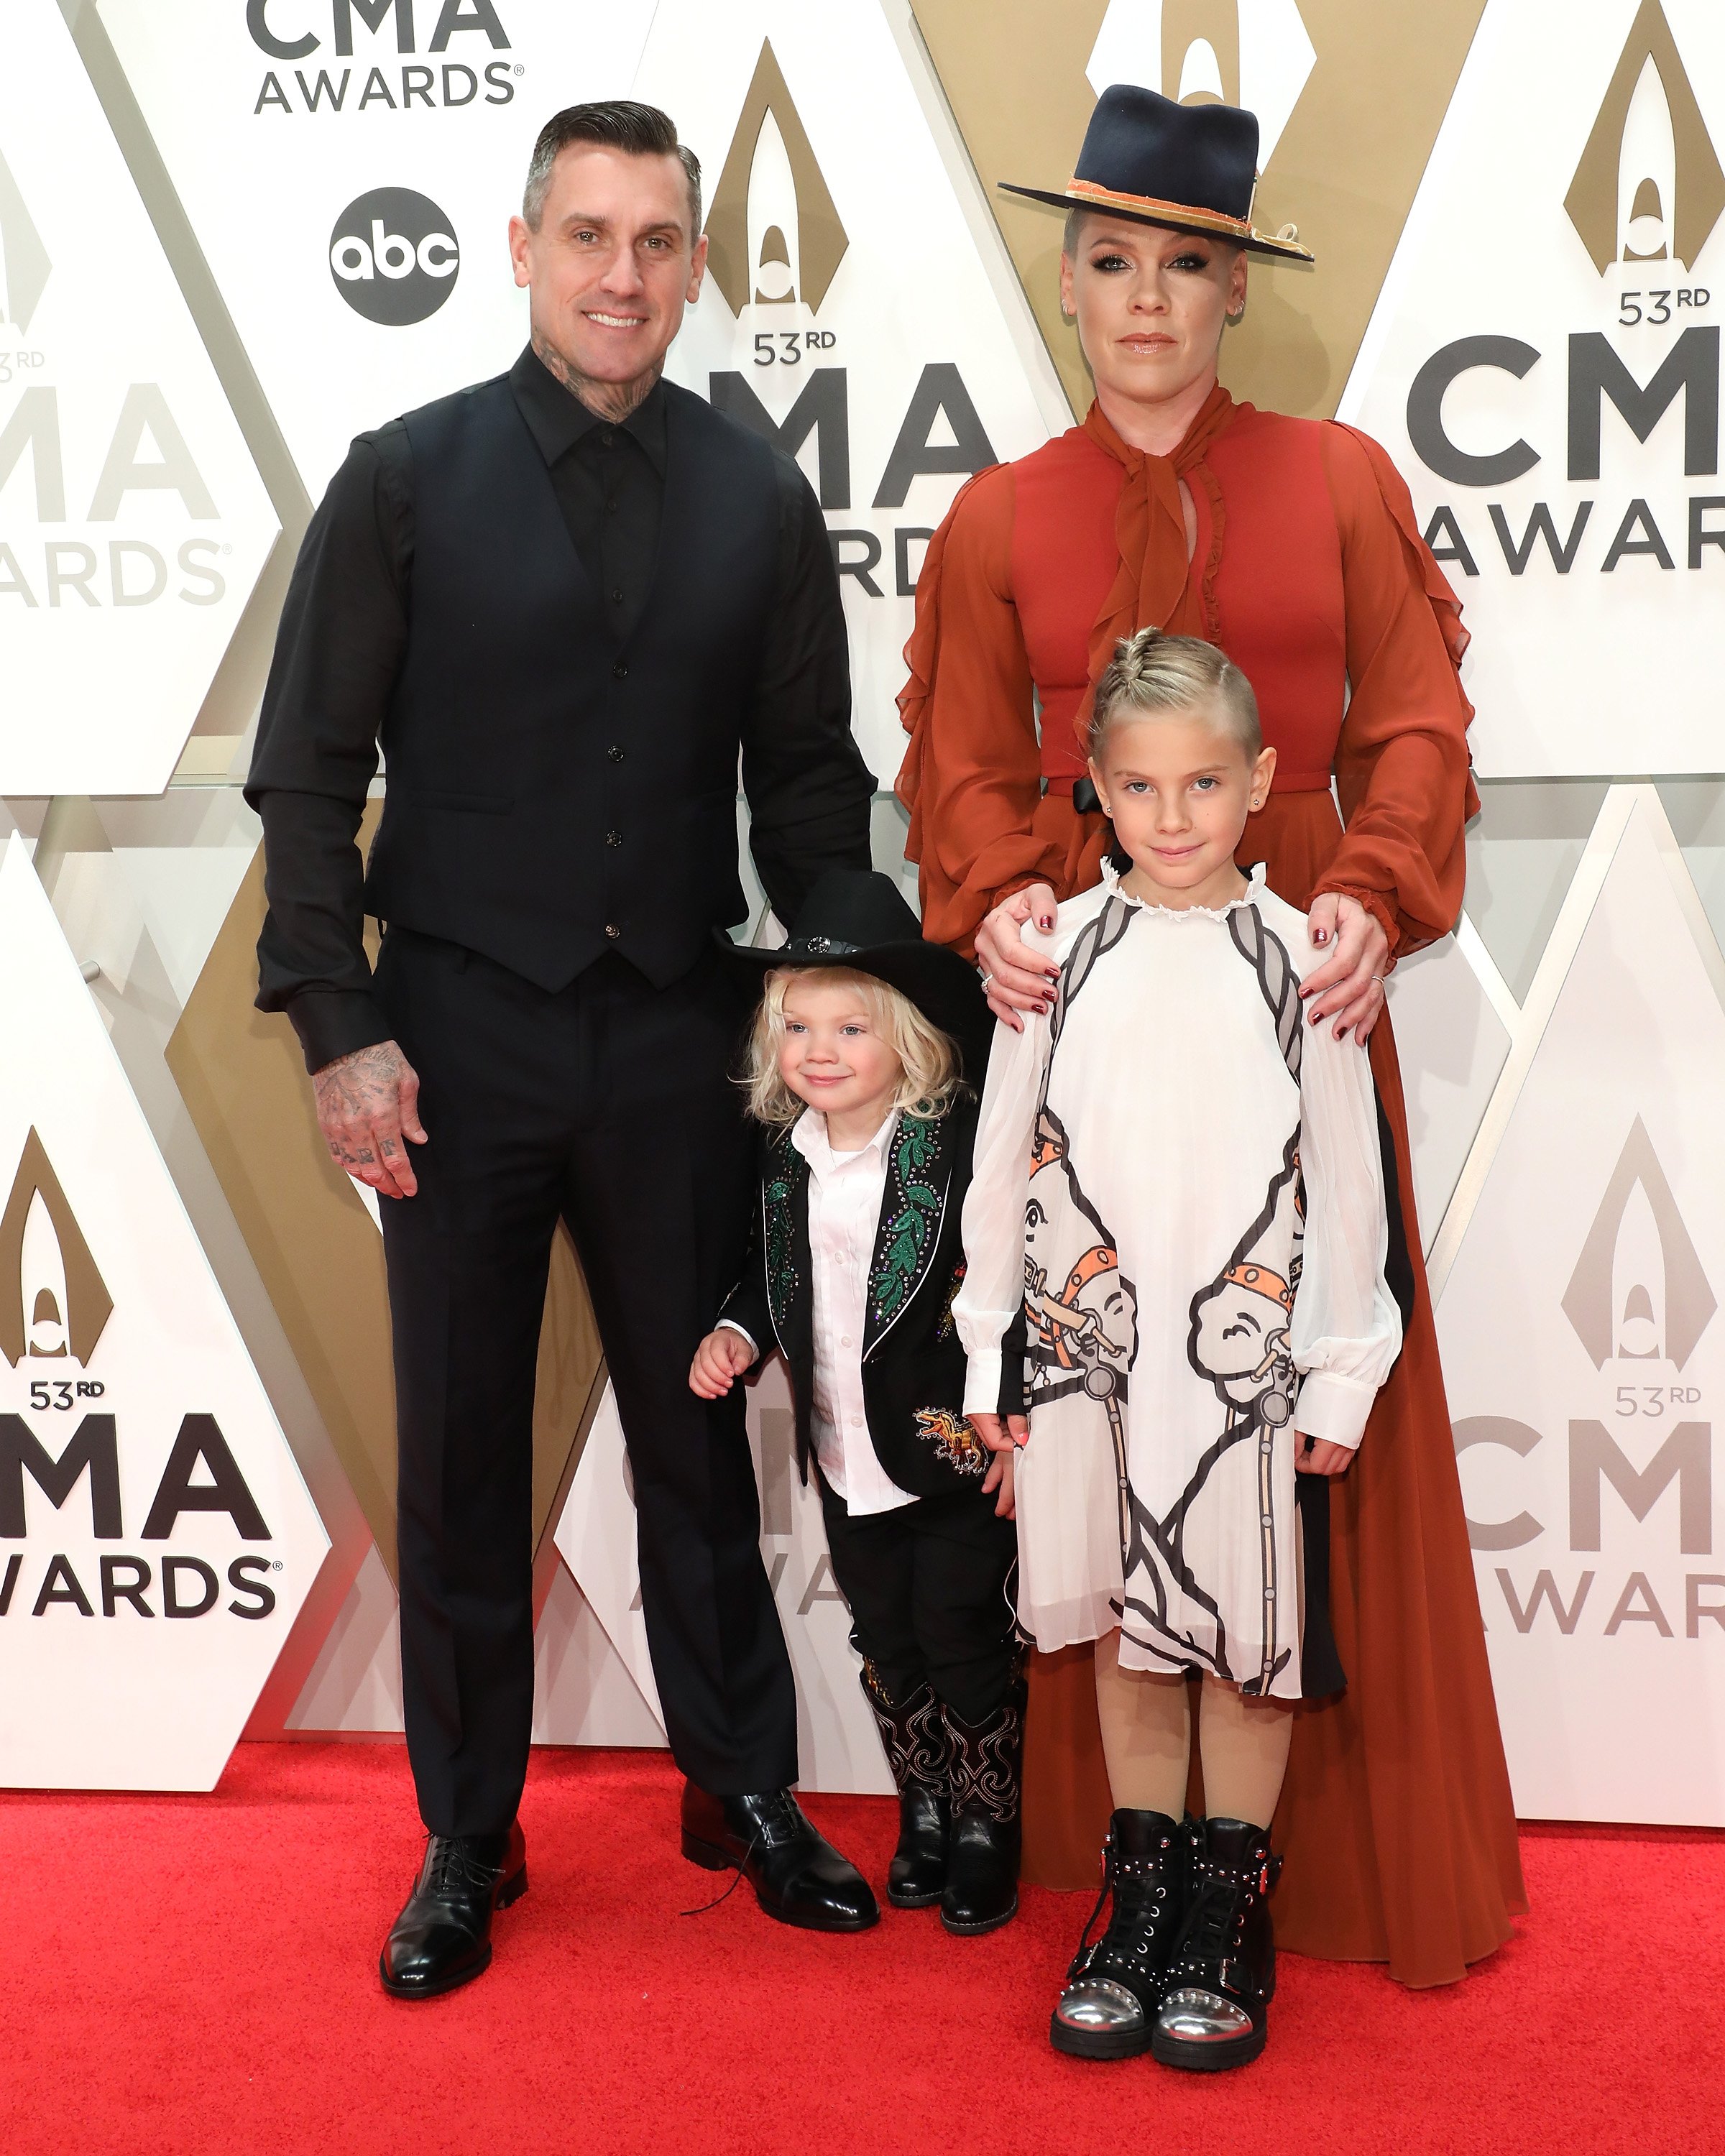 Pink and her husband, Carey Hart attended the CMAs with their daughter, Willow, and son, Jameson, November, 2019. | Photo: Getty Images.